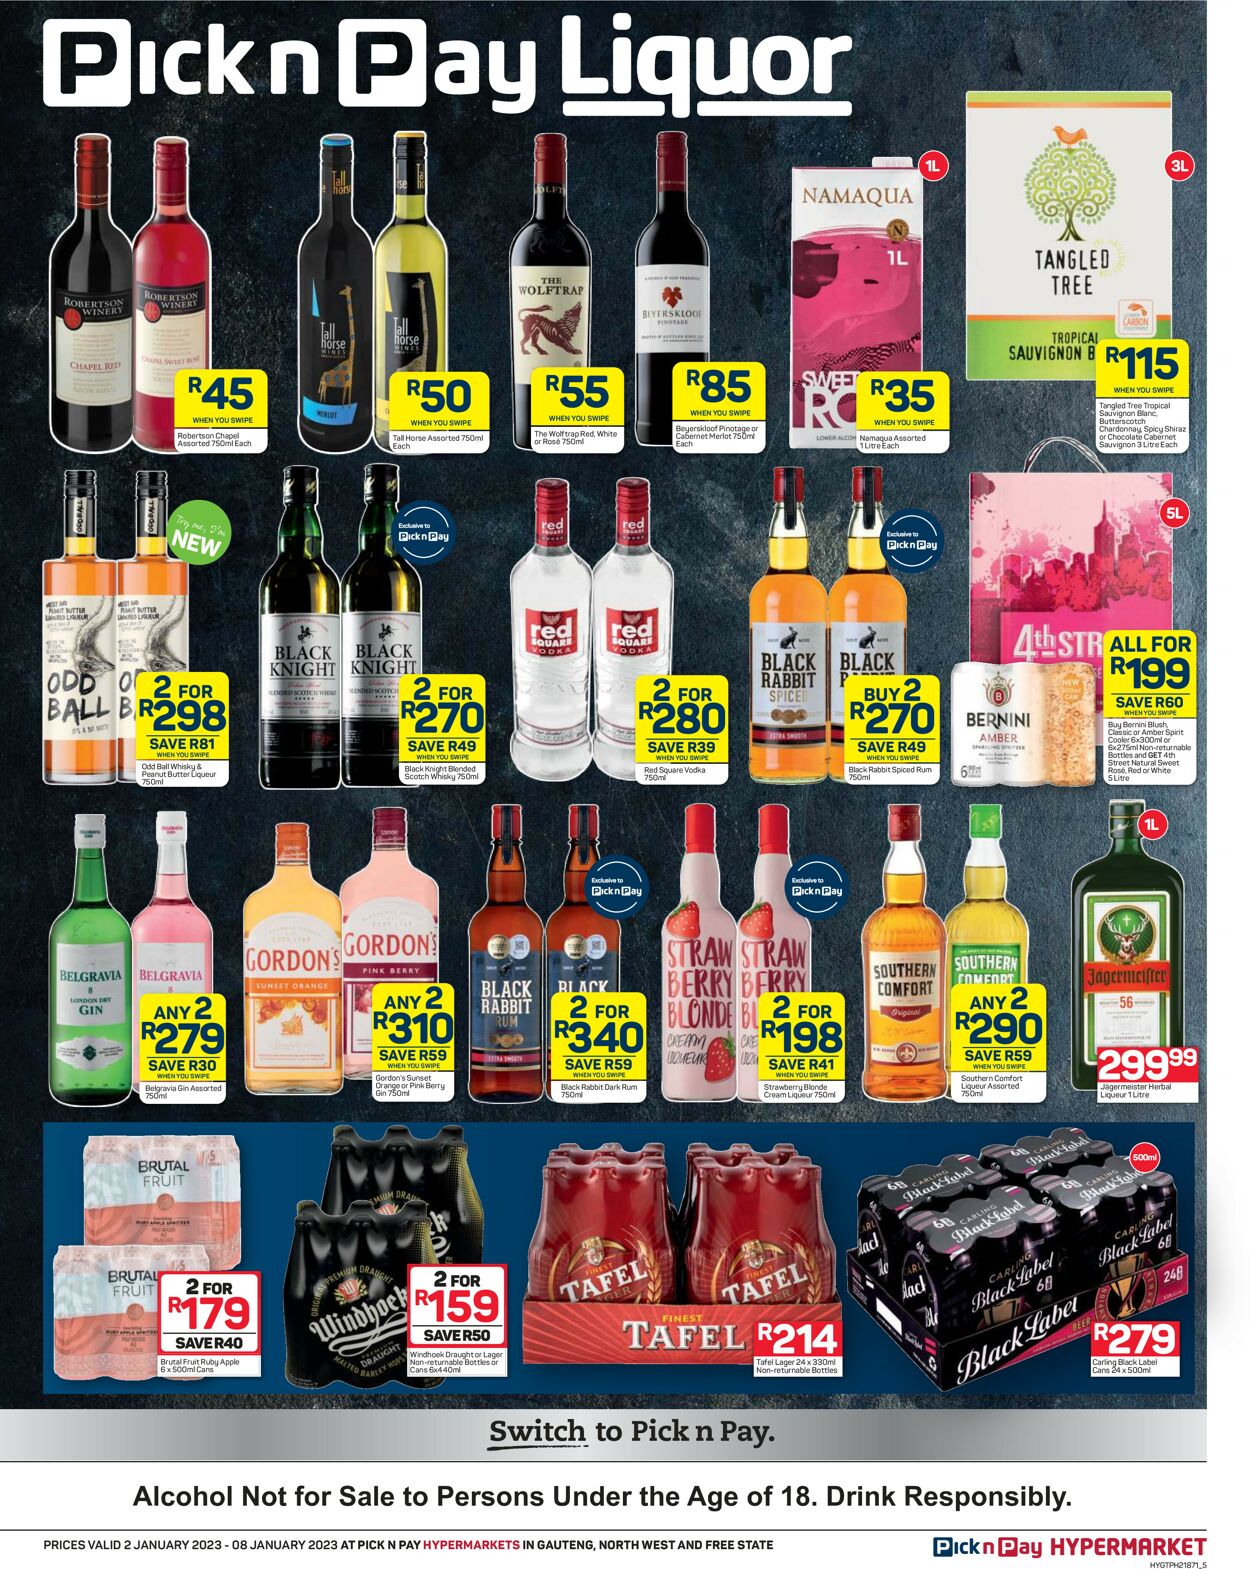 Pick n Pay Current catalogue 2023/01/02 2023/01/08 [5]